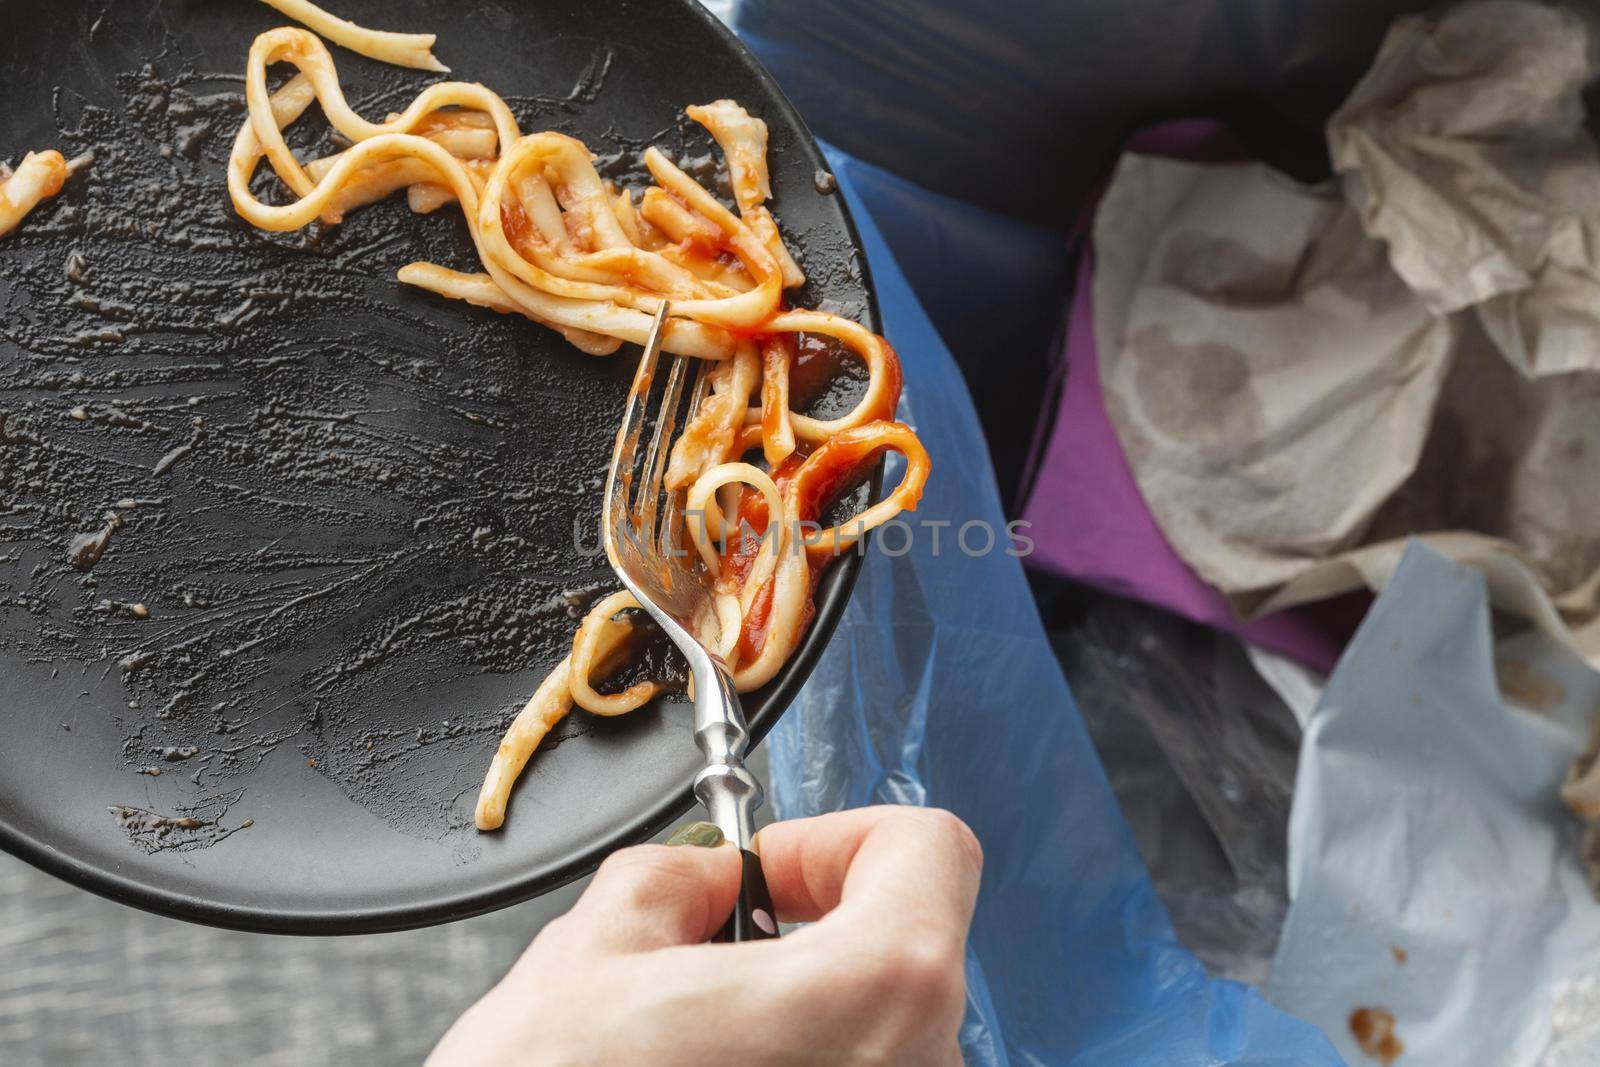 leftover wasted spaghetti pasta thrown bin. High quality beautiful photo concept by Zahard